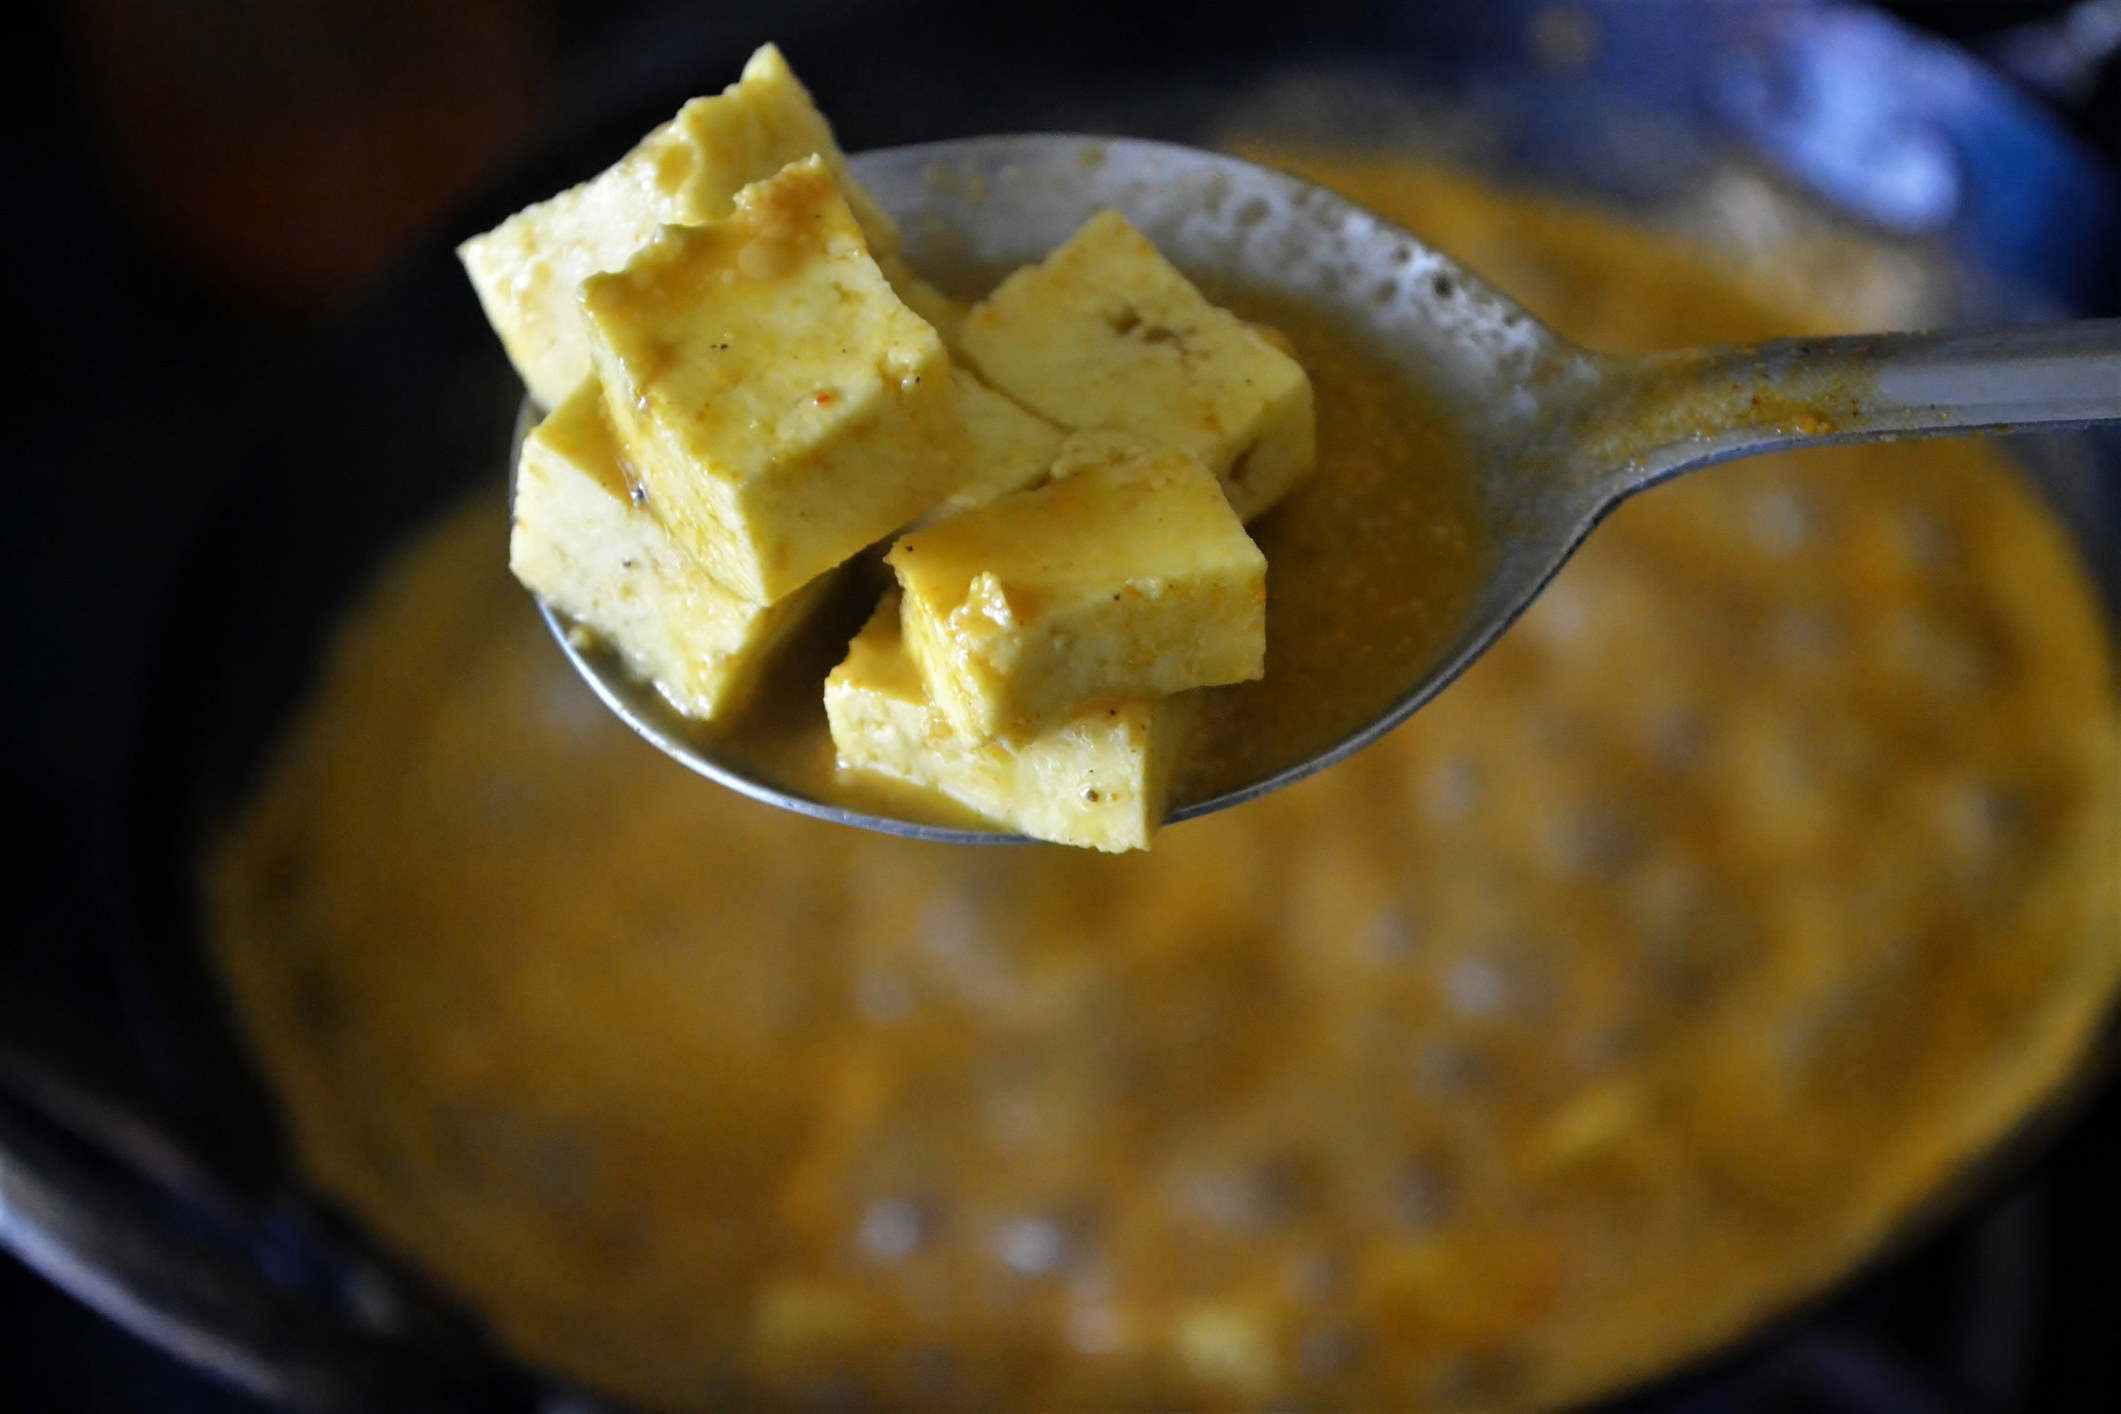 A spoon holding pieces of Indian paneer cheese